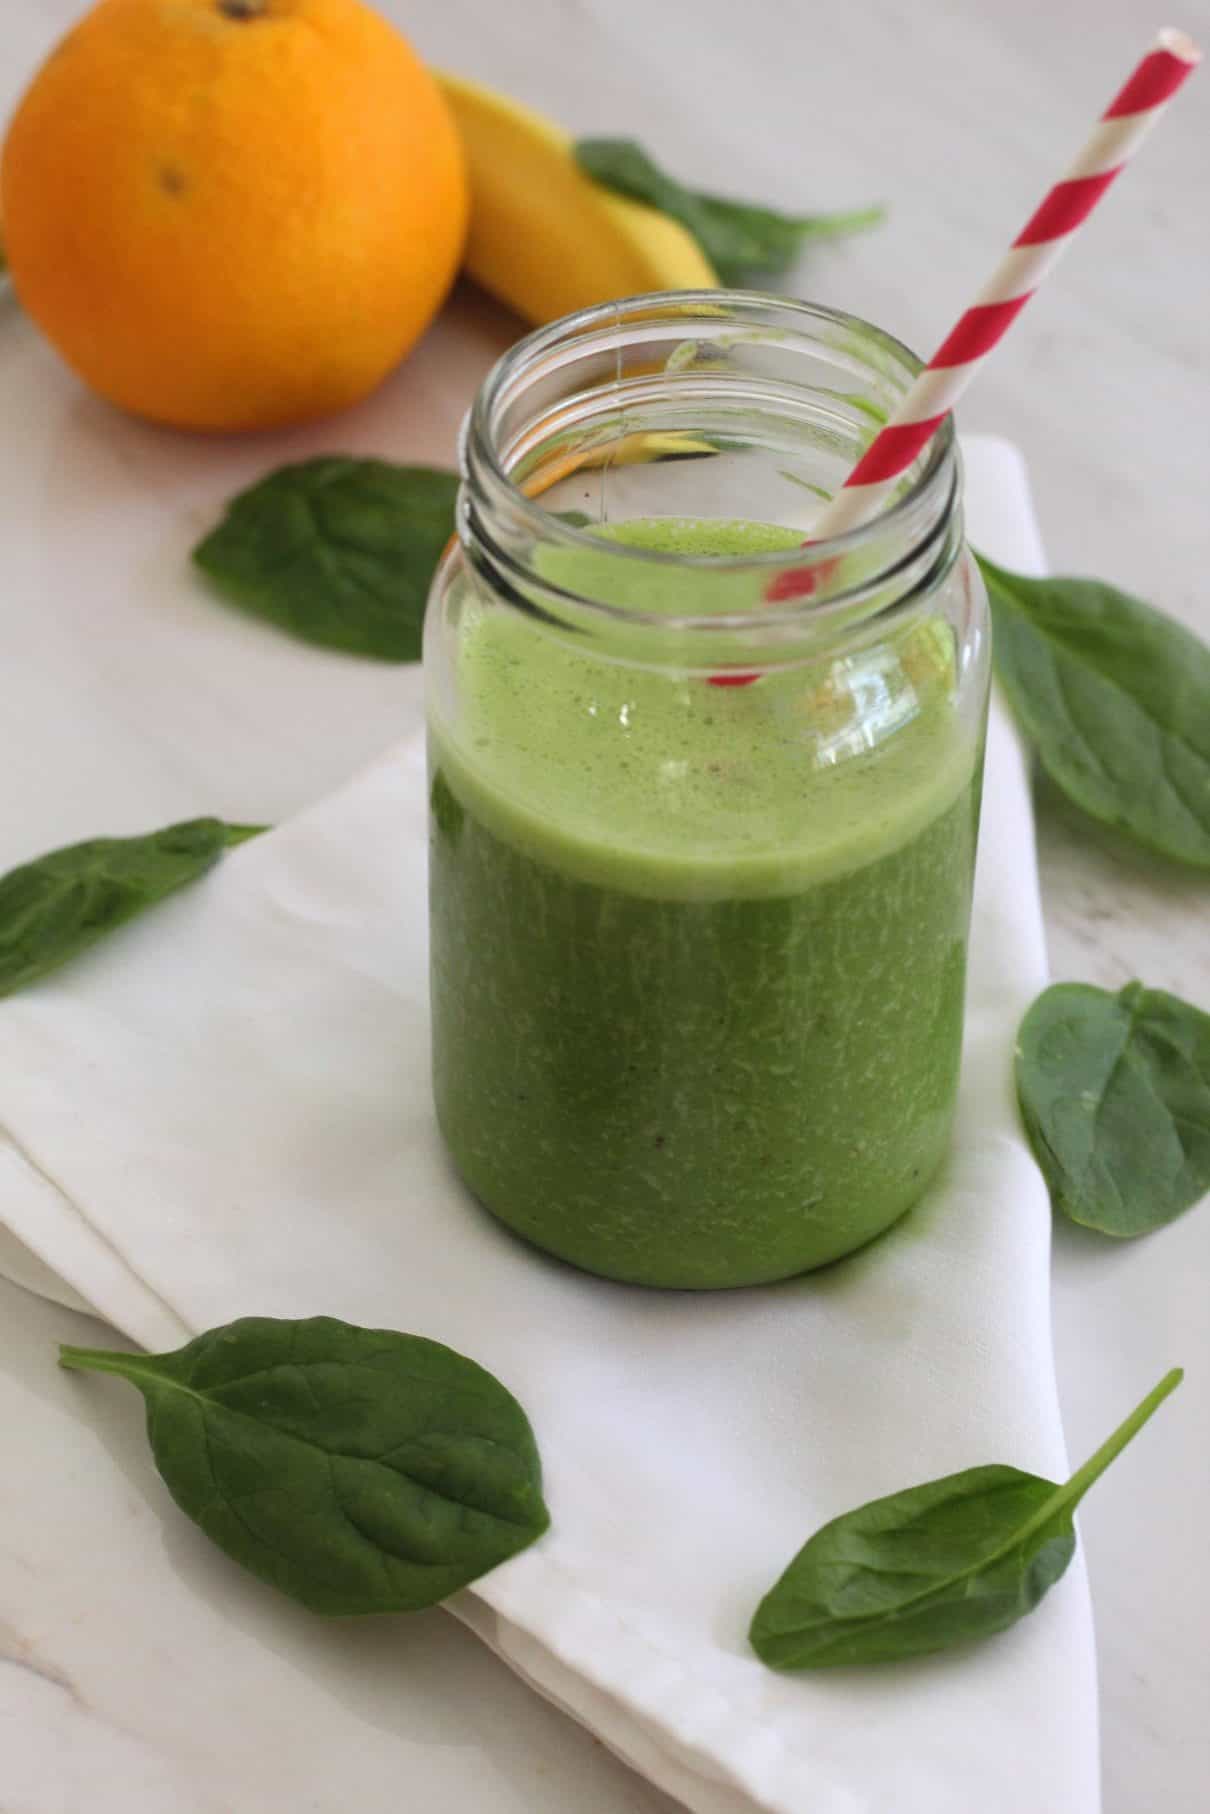 A smoothie jar with a paper straw. Smoothie is green. You can see an orange and a banana in the background as well as scattered spinach leaves.